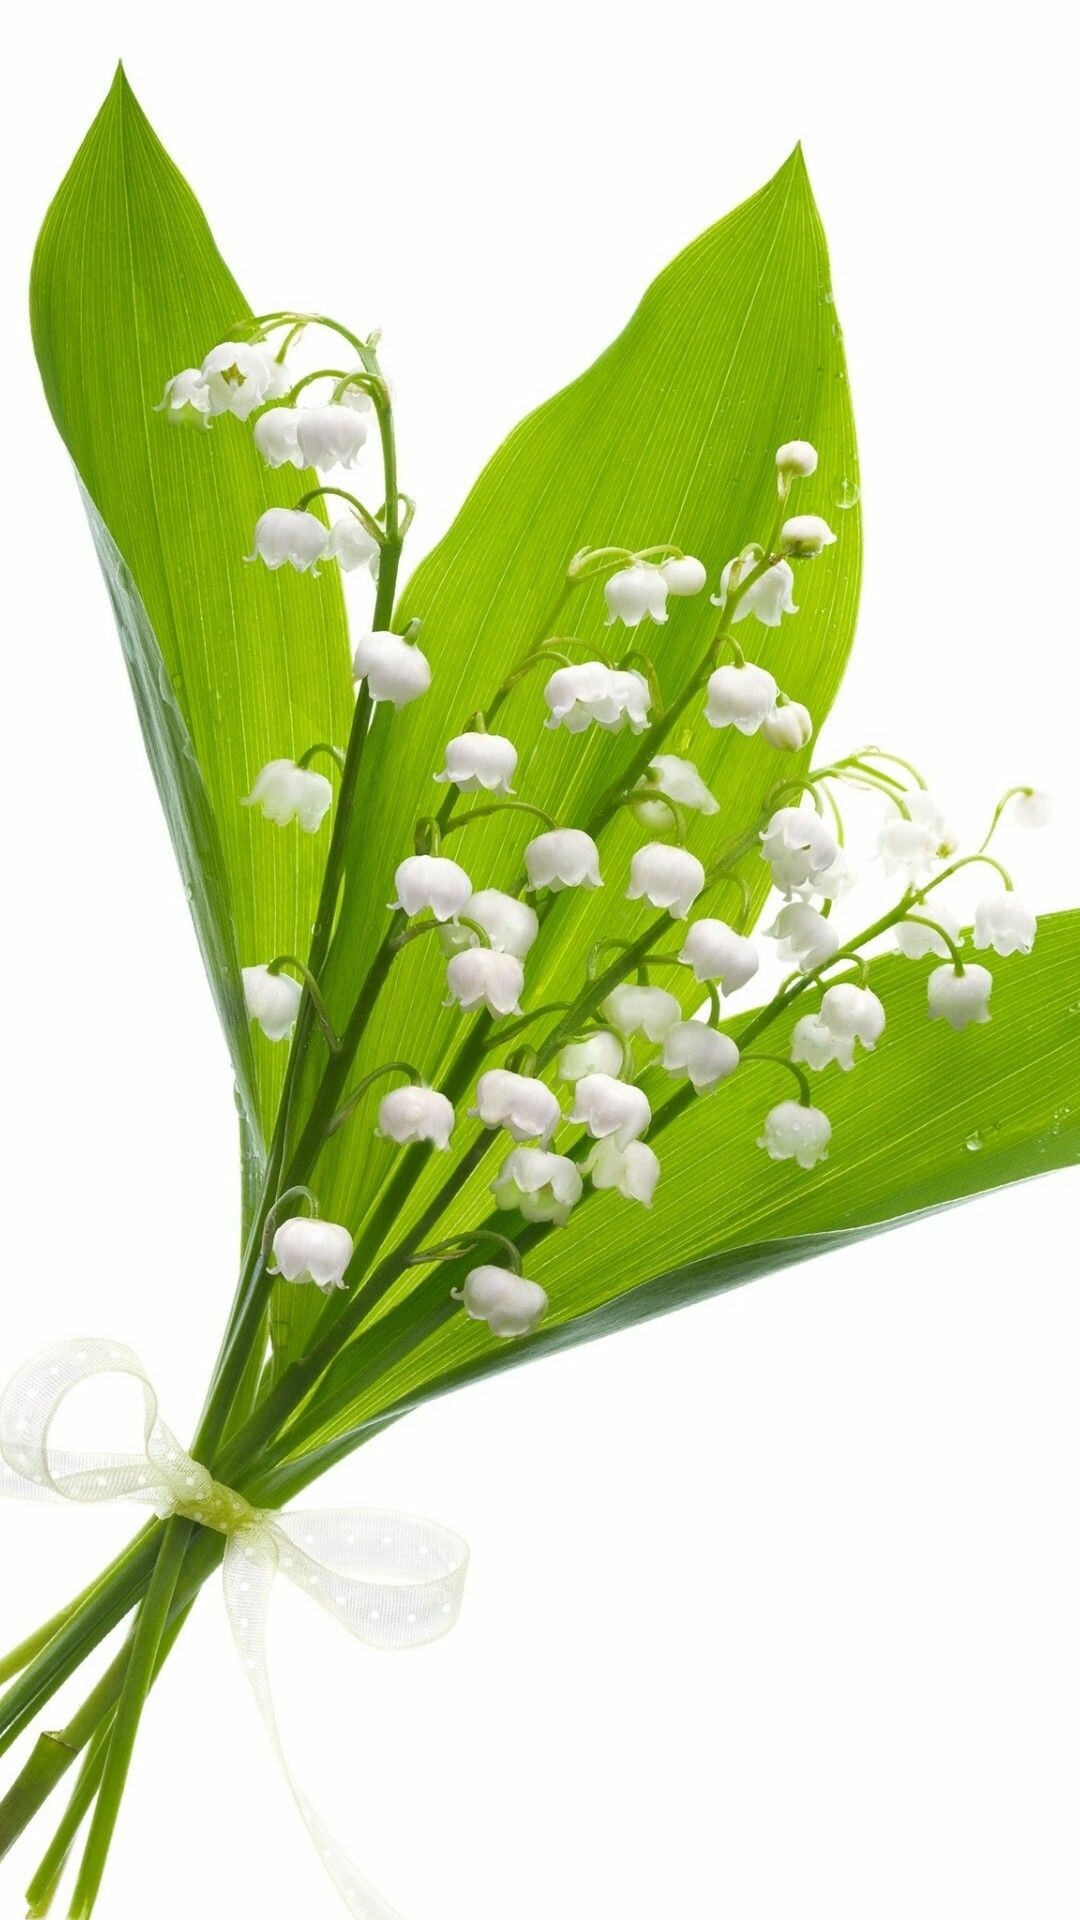 Lily of the Valley: The little bell-shaped inflorescences are symbols of purity, innocence, and love and, in many countries, they bloom just in time for Mother’s Day. 1080x1920 Full HD Wallpaper.